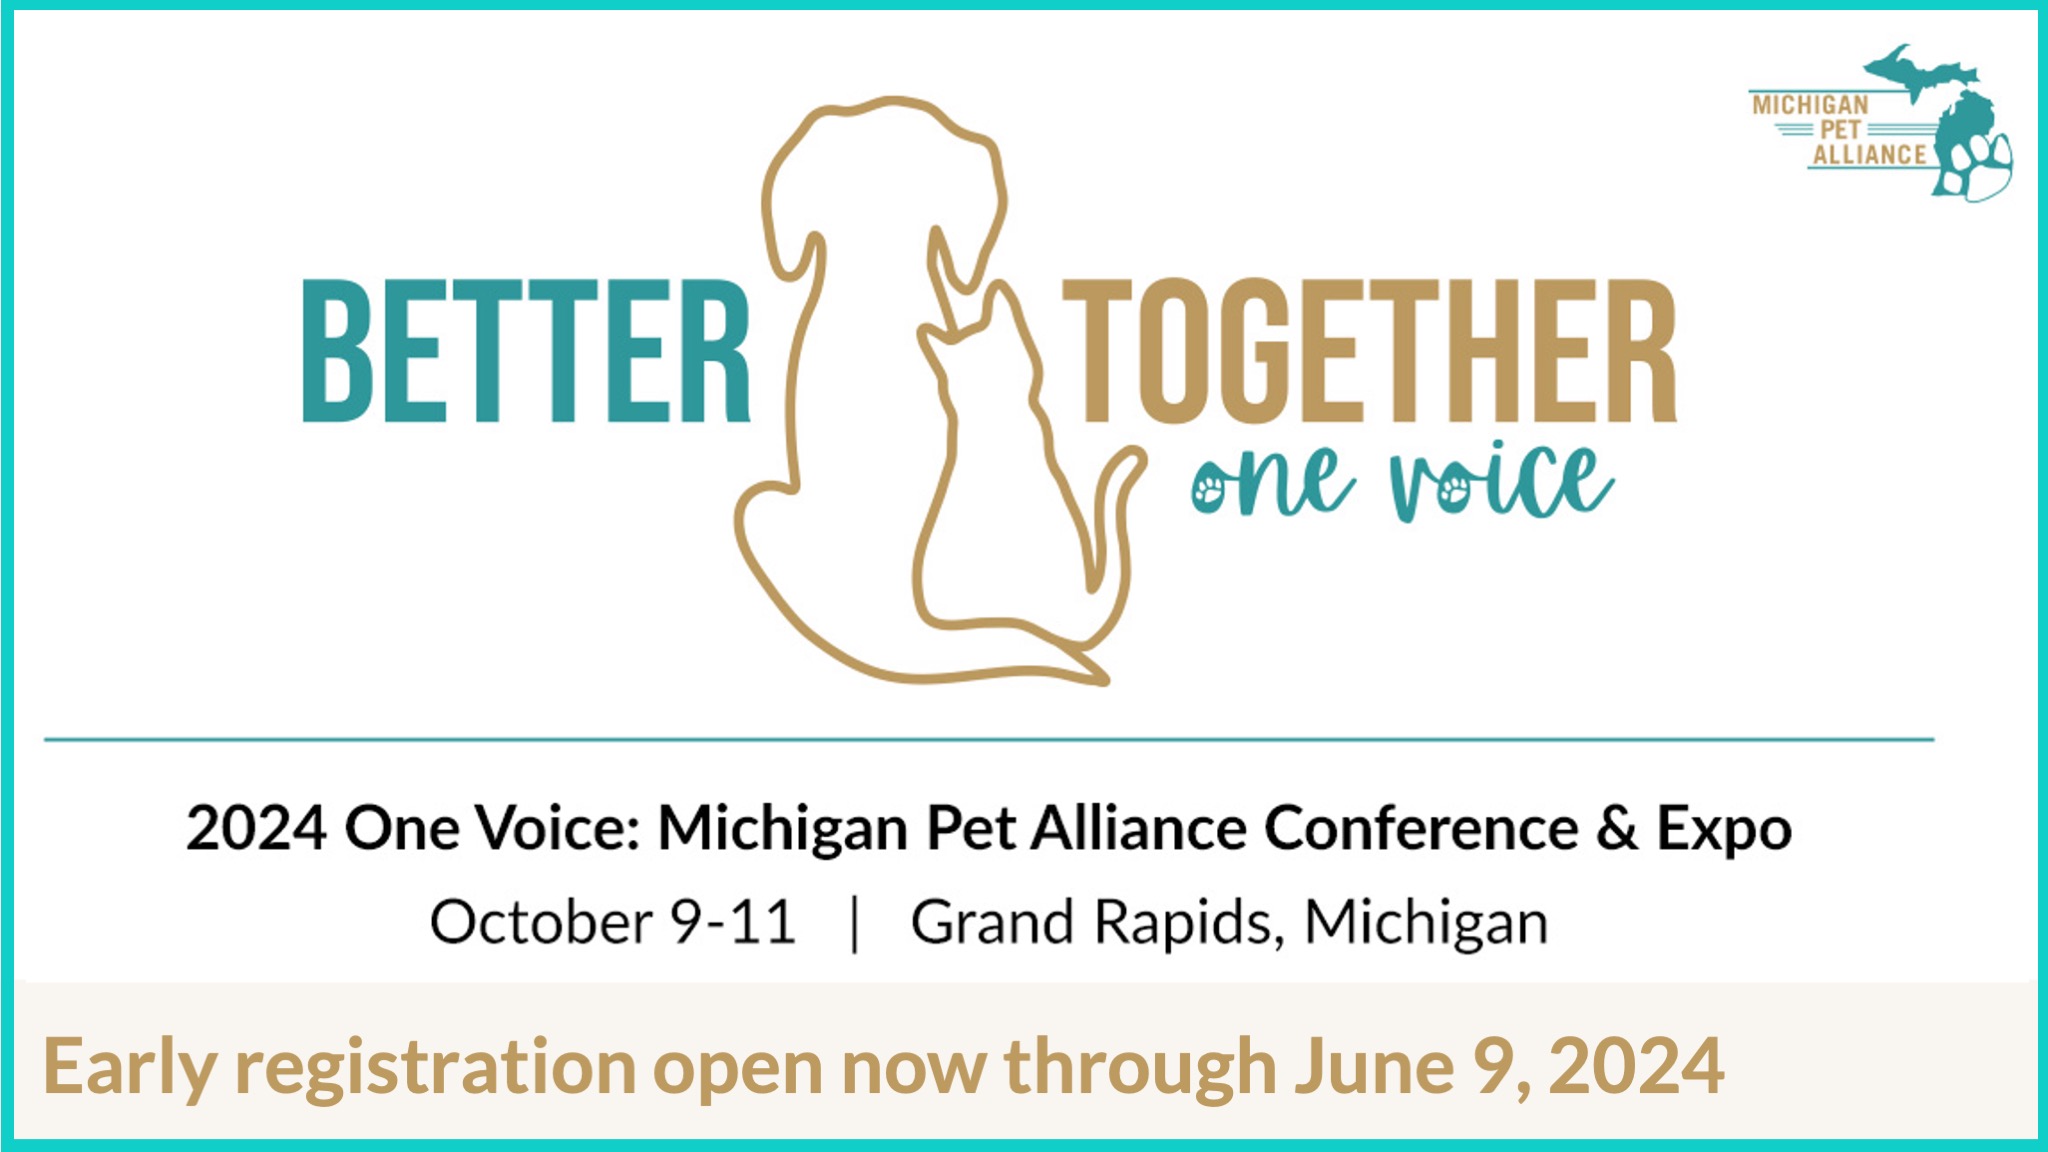 2024 One Voice: Michigan Pet Alliance Conference & Expo October 9-11, Grand Rapids, MI, Early registration open now through June 9, 2024